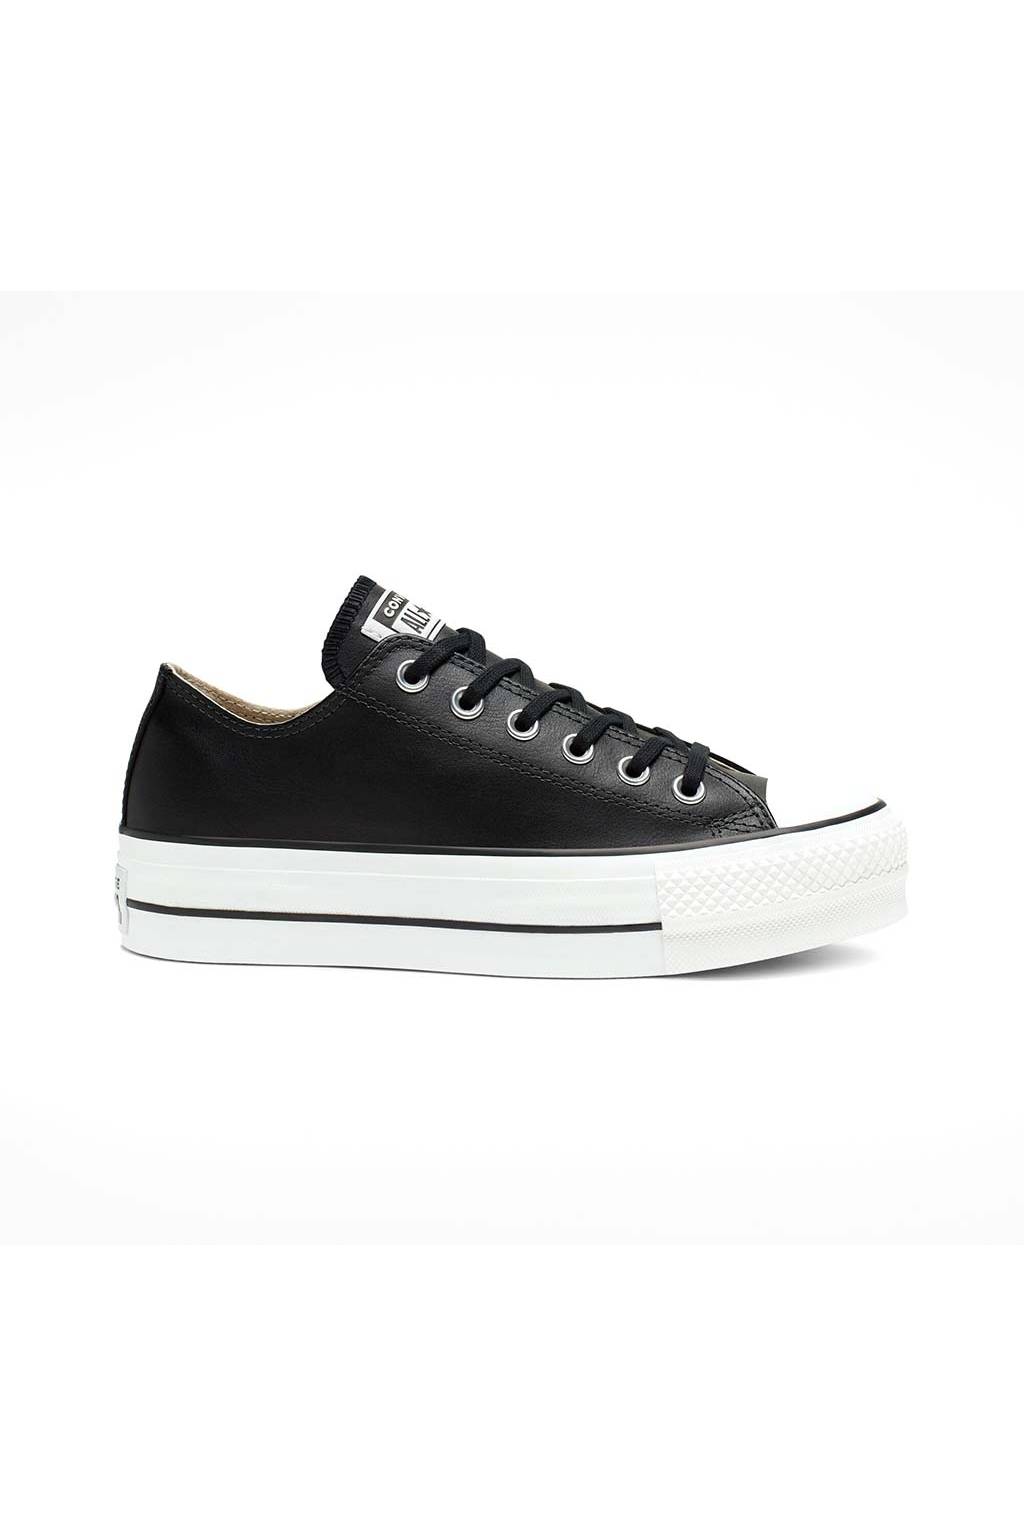 Converse chuck taylor all star platform clean leather shoes 561681c ...